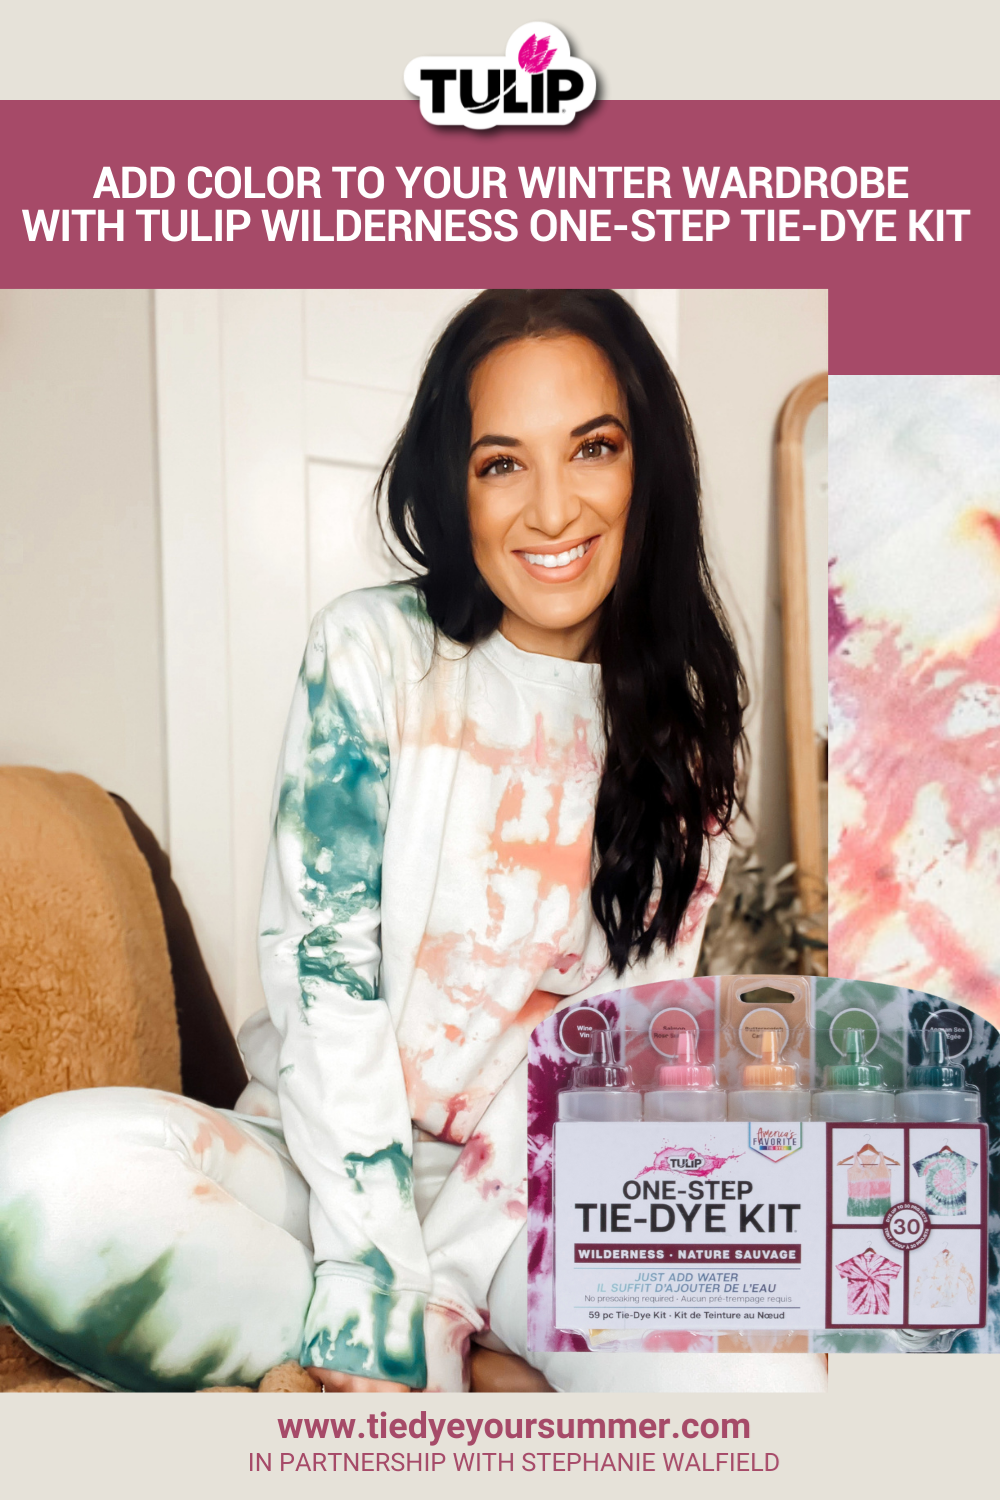 Add Color to Your Winter Wardrobe with Tulip Wilderness One-Step Tie-Dye Kit